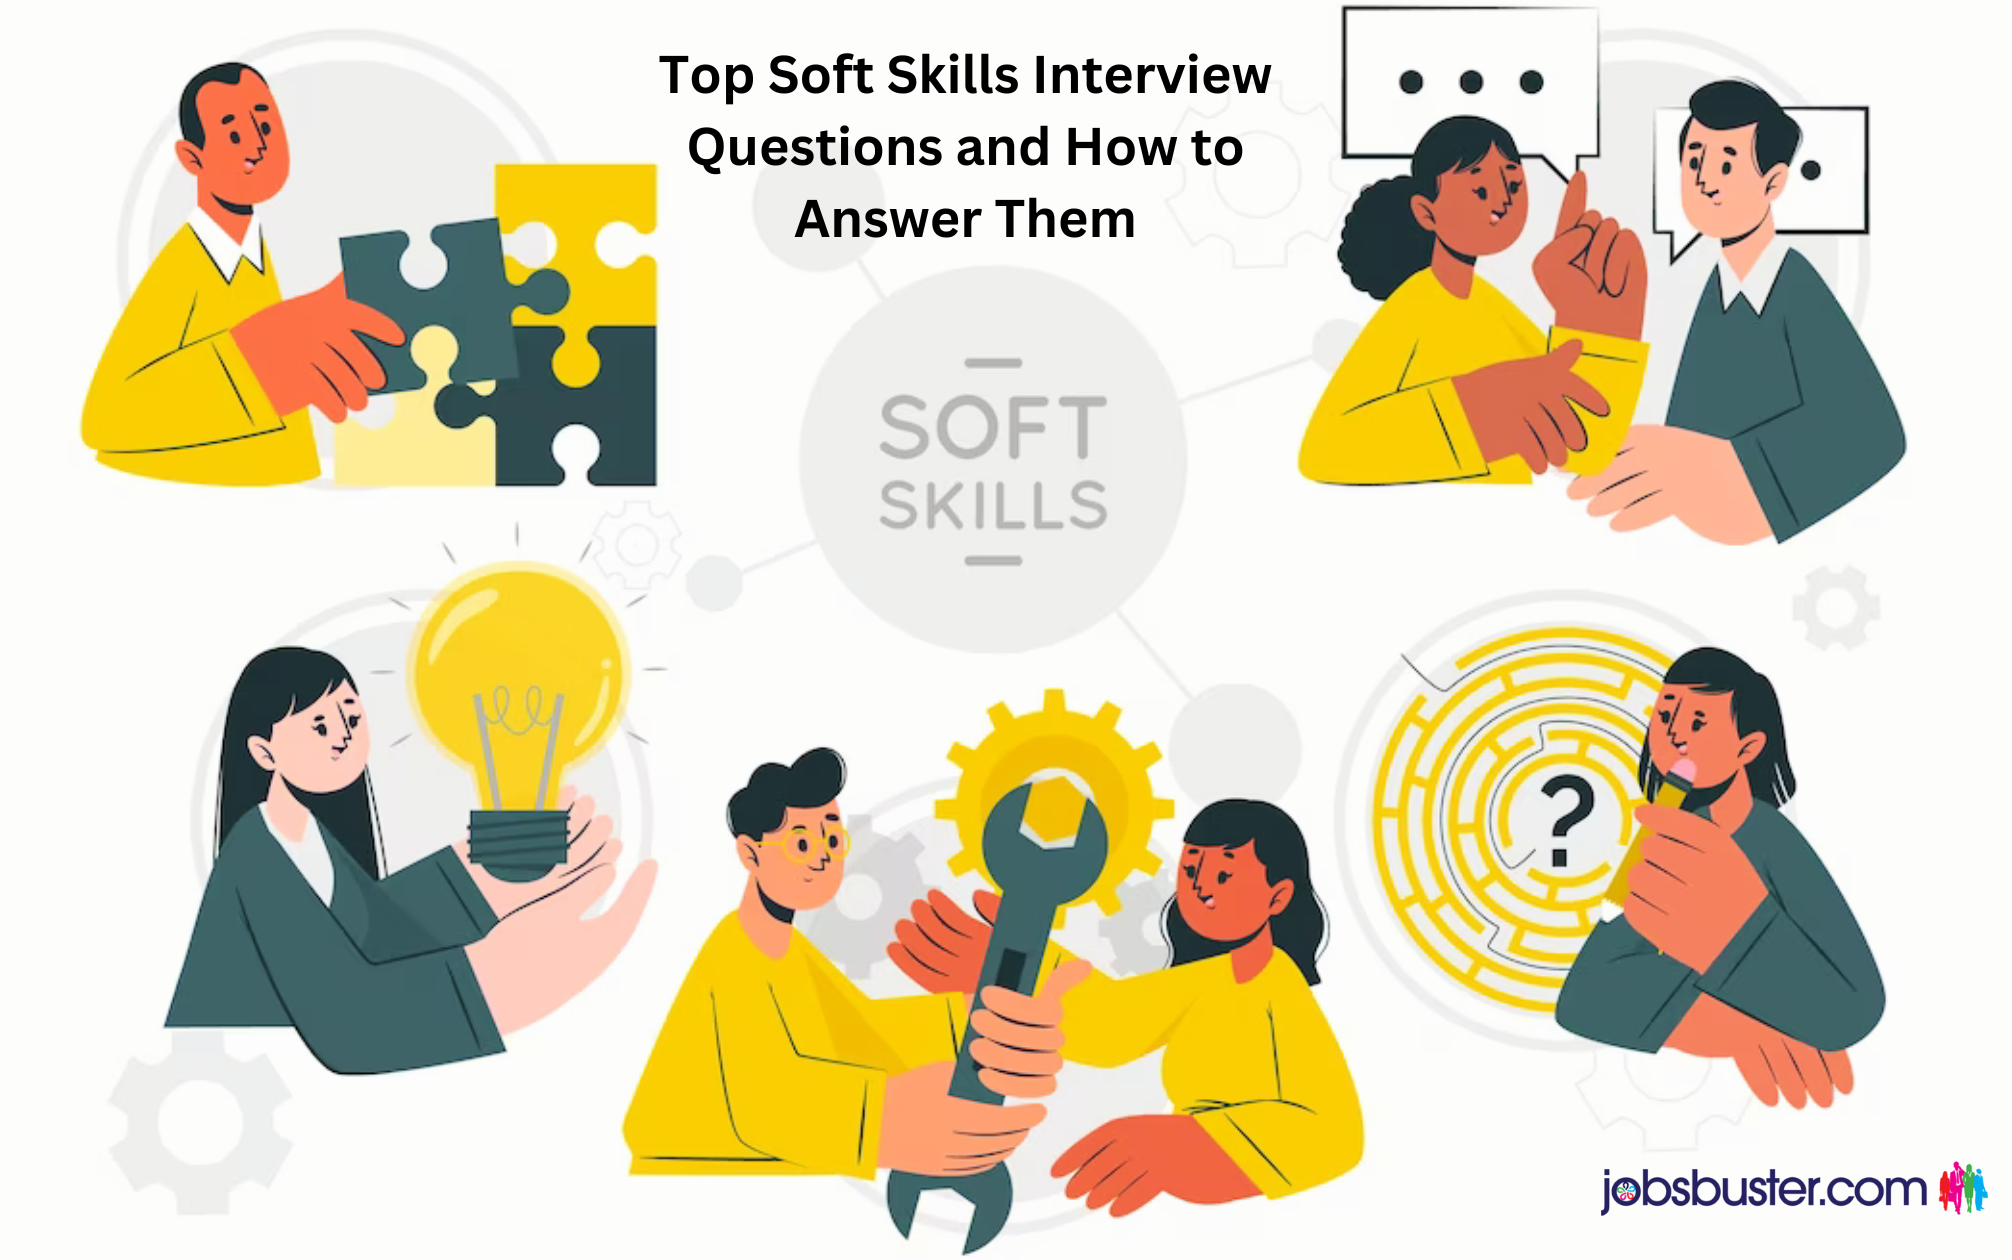 Top Soft Skills Interview Questions and How to Answer Them